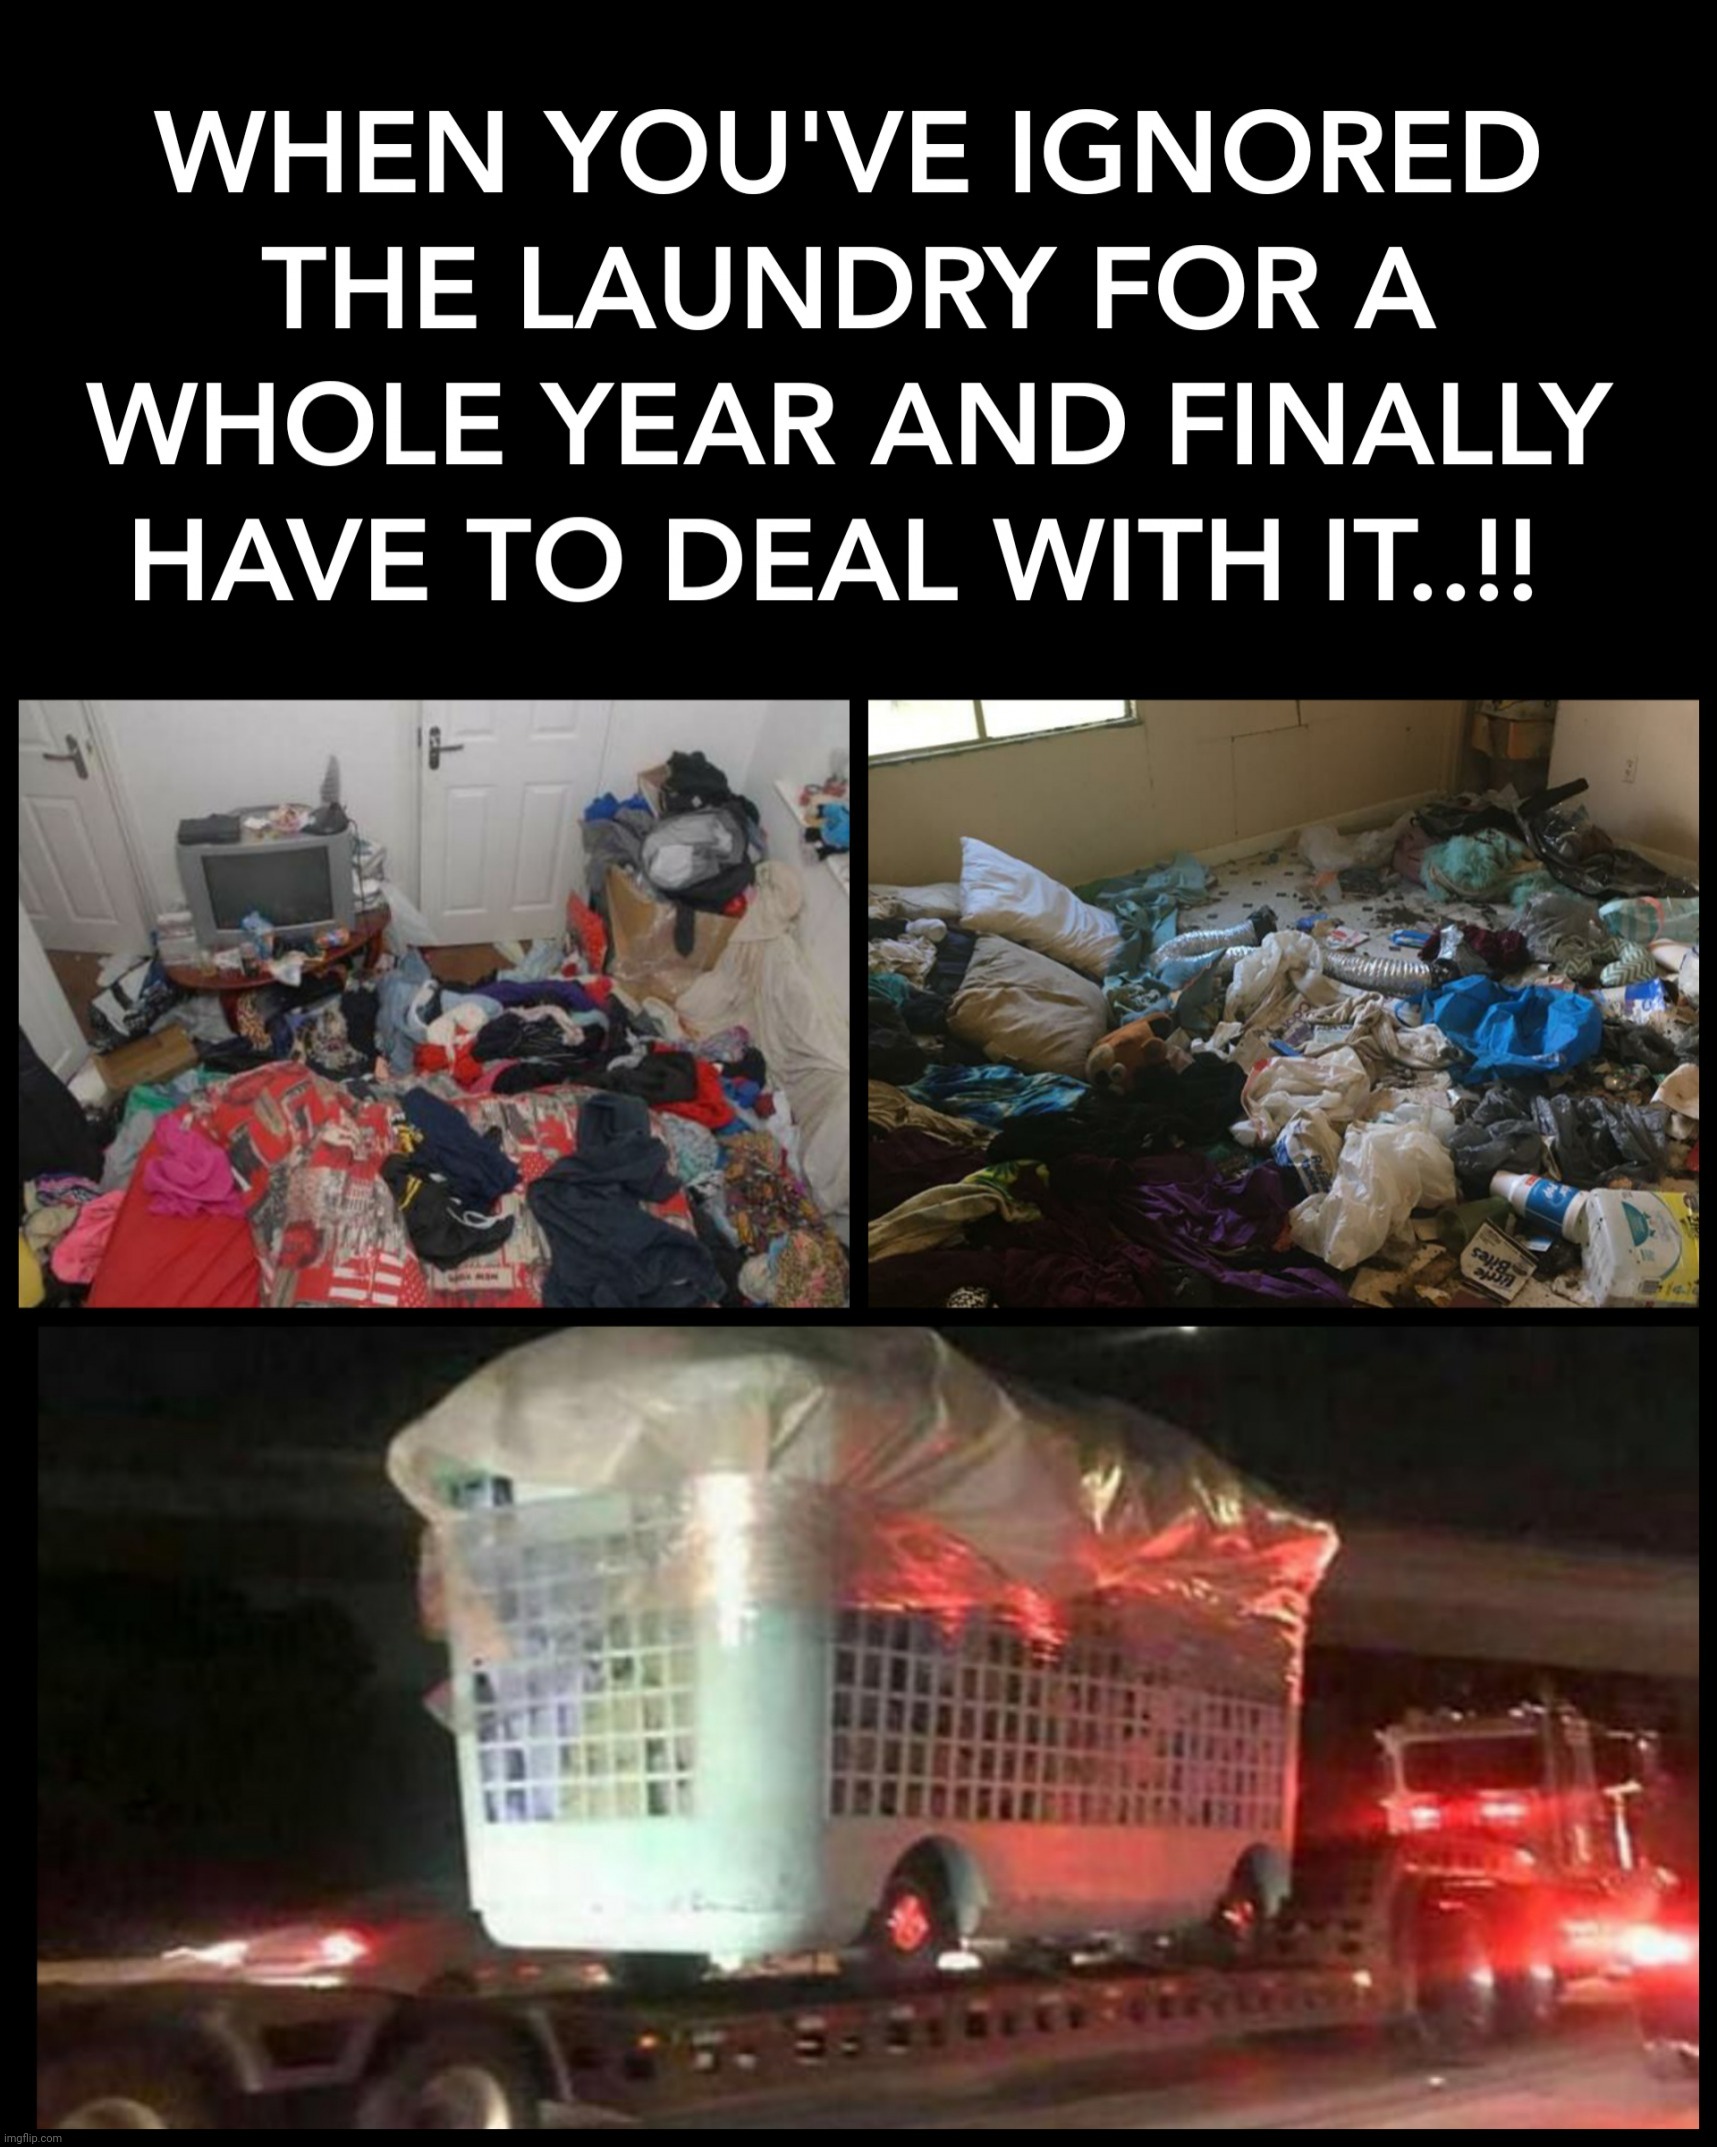 WHEN YOU'VE IGNORED THE LAUNDRY FOR A WHOLE YEAR AND FINALLY HAVE TO DEAL WITH IT..!! | image tagged in dirty laundry,ignorance,filthy,laundry,deal with it,memes | made w/ Imgflip meme maker